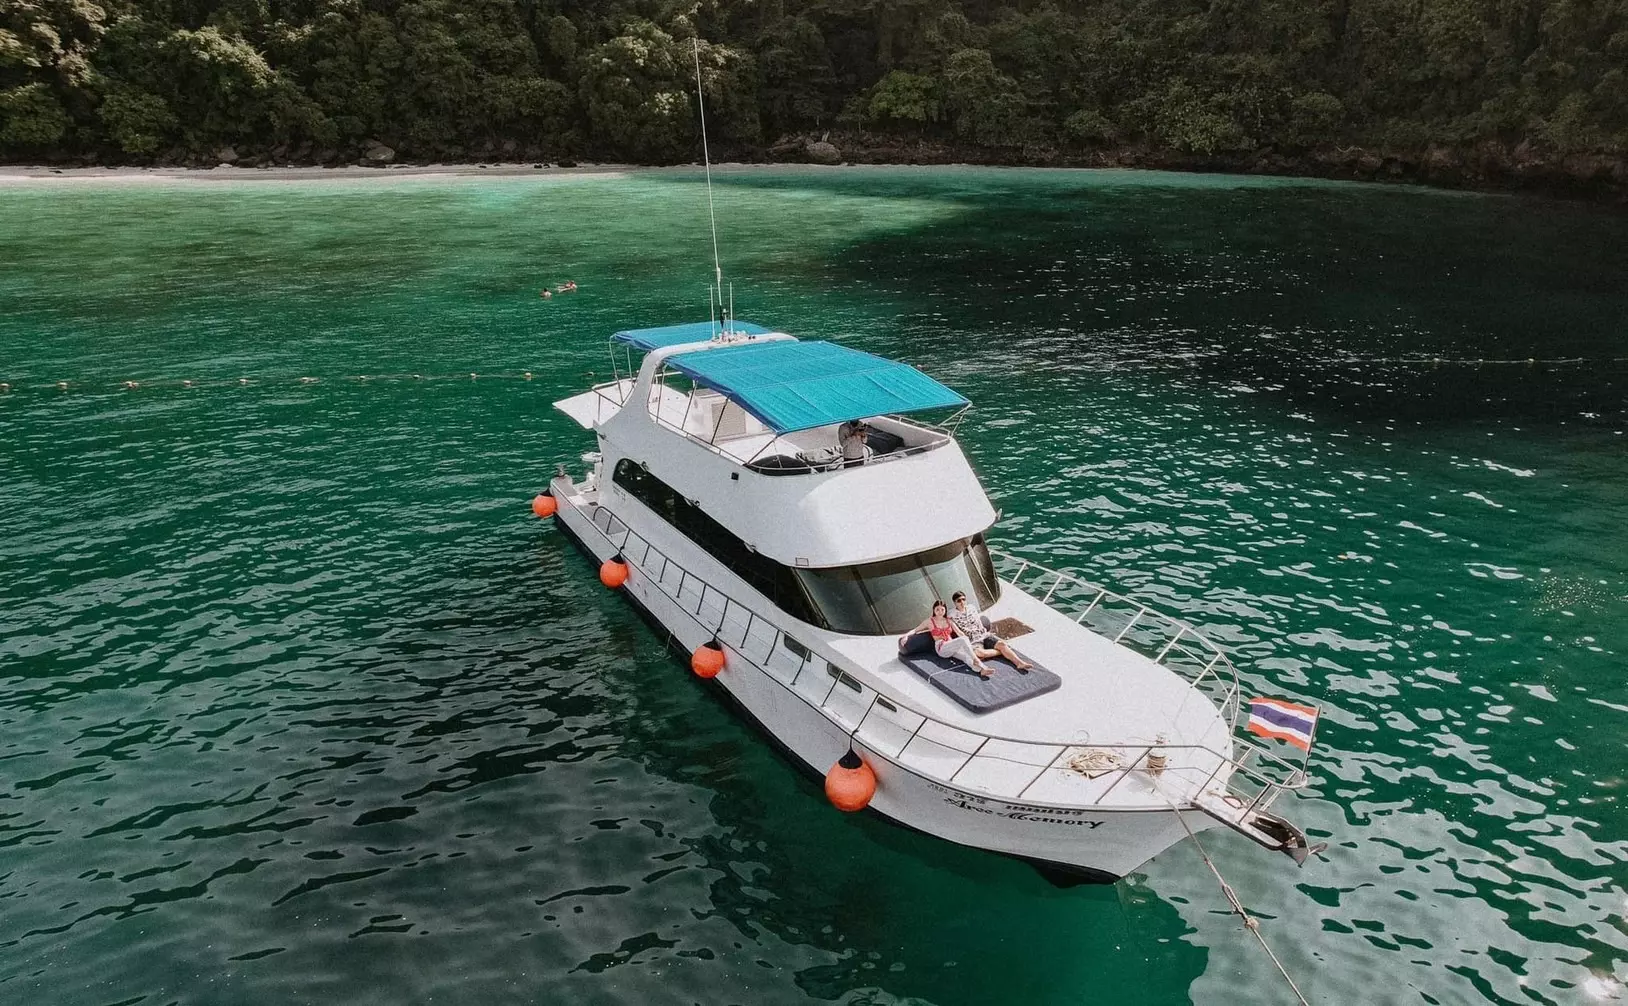 Aree by Custom Made - Top rates for a Rental of a private Power Boat in Thailand